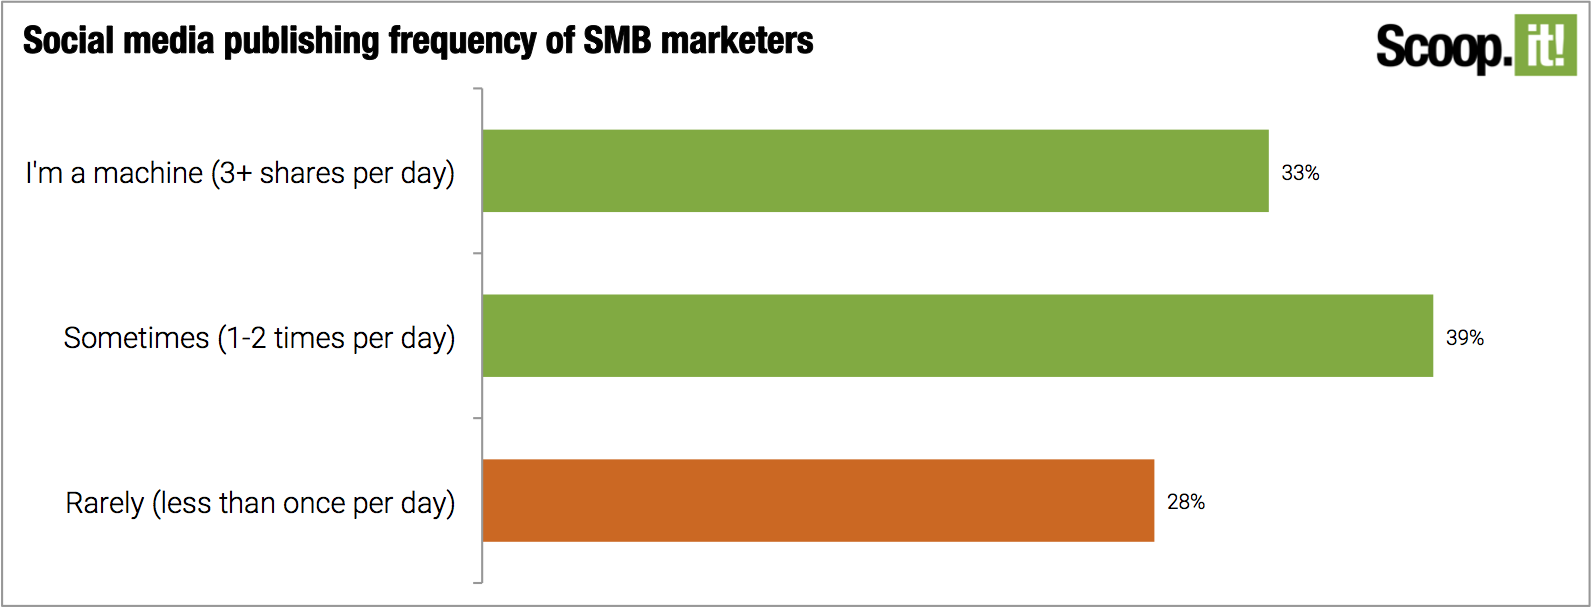 Social media publishing frequency of SMB marketers